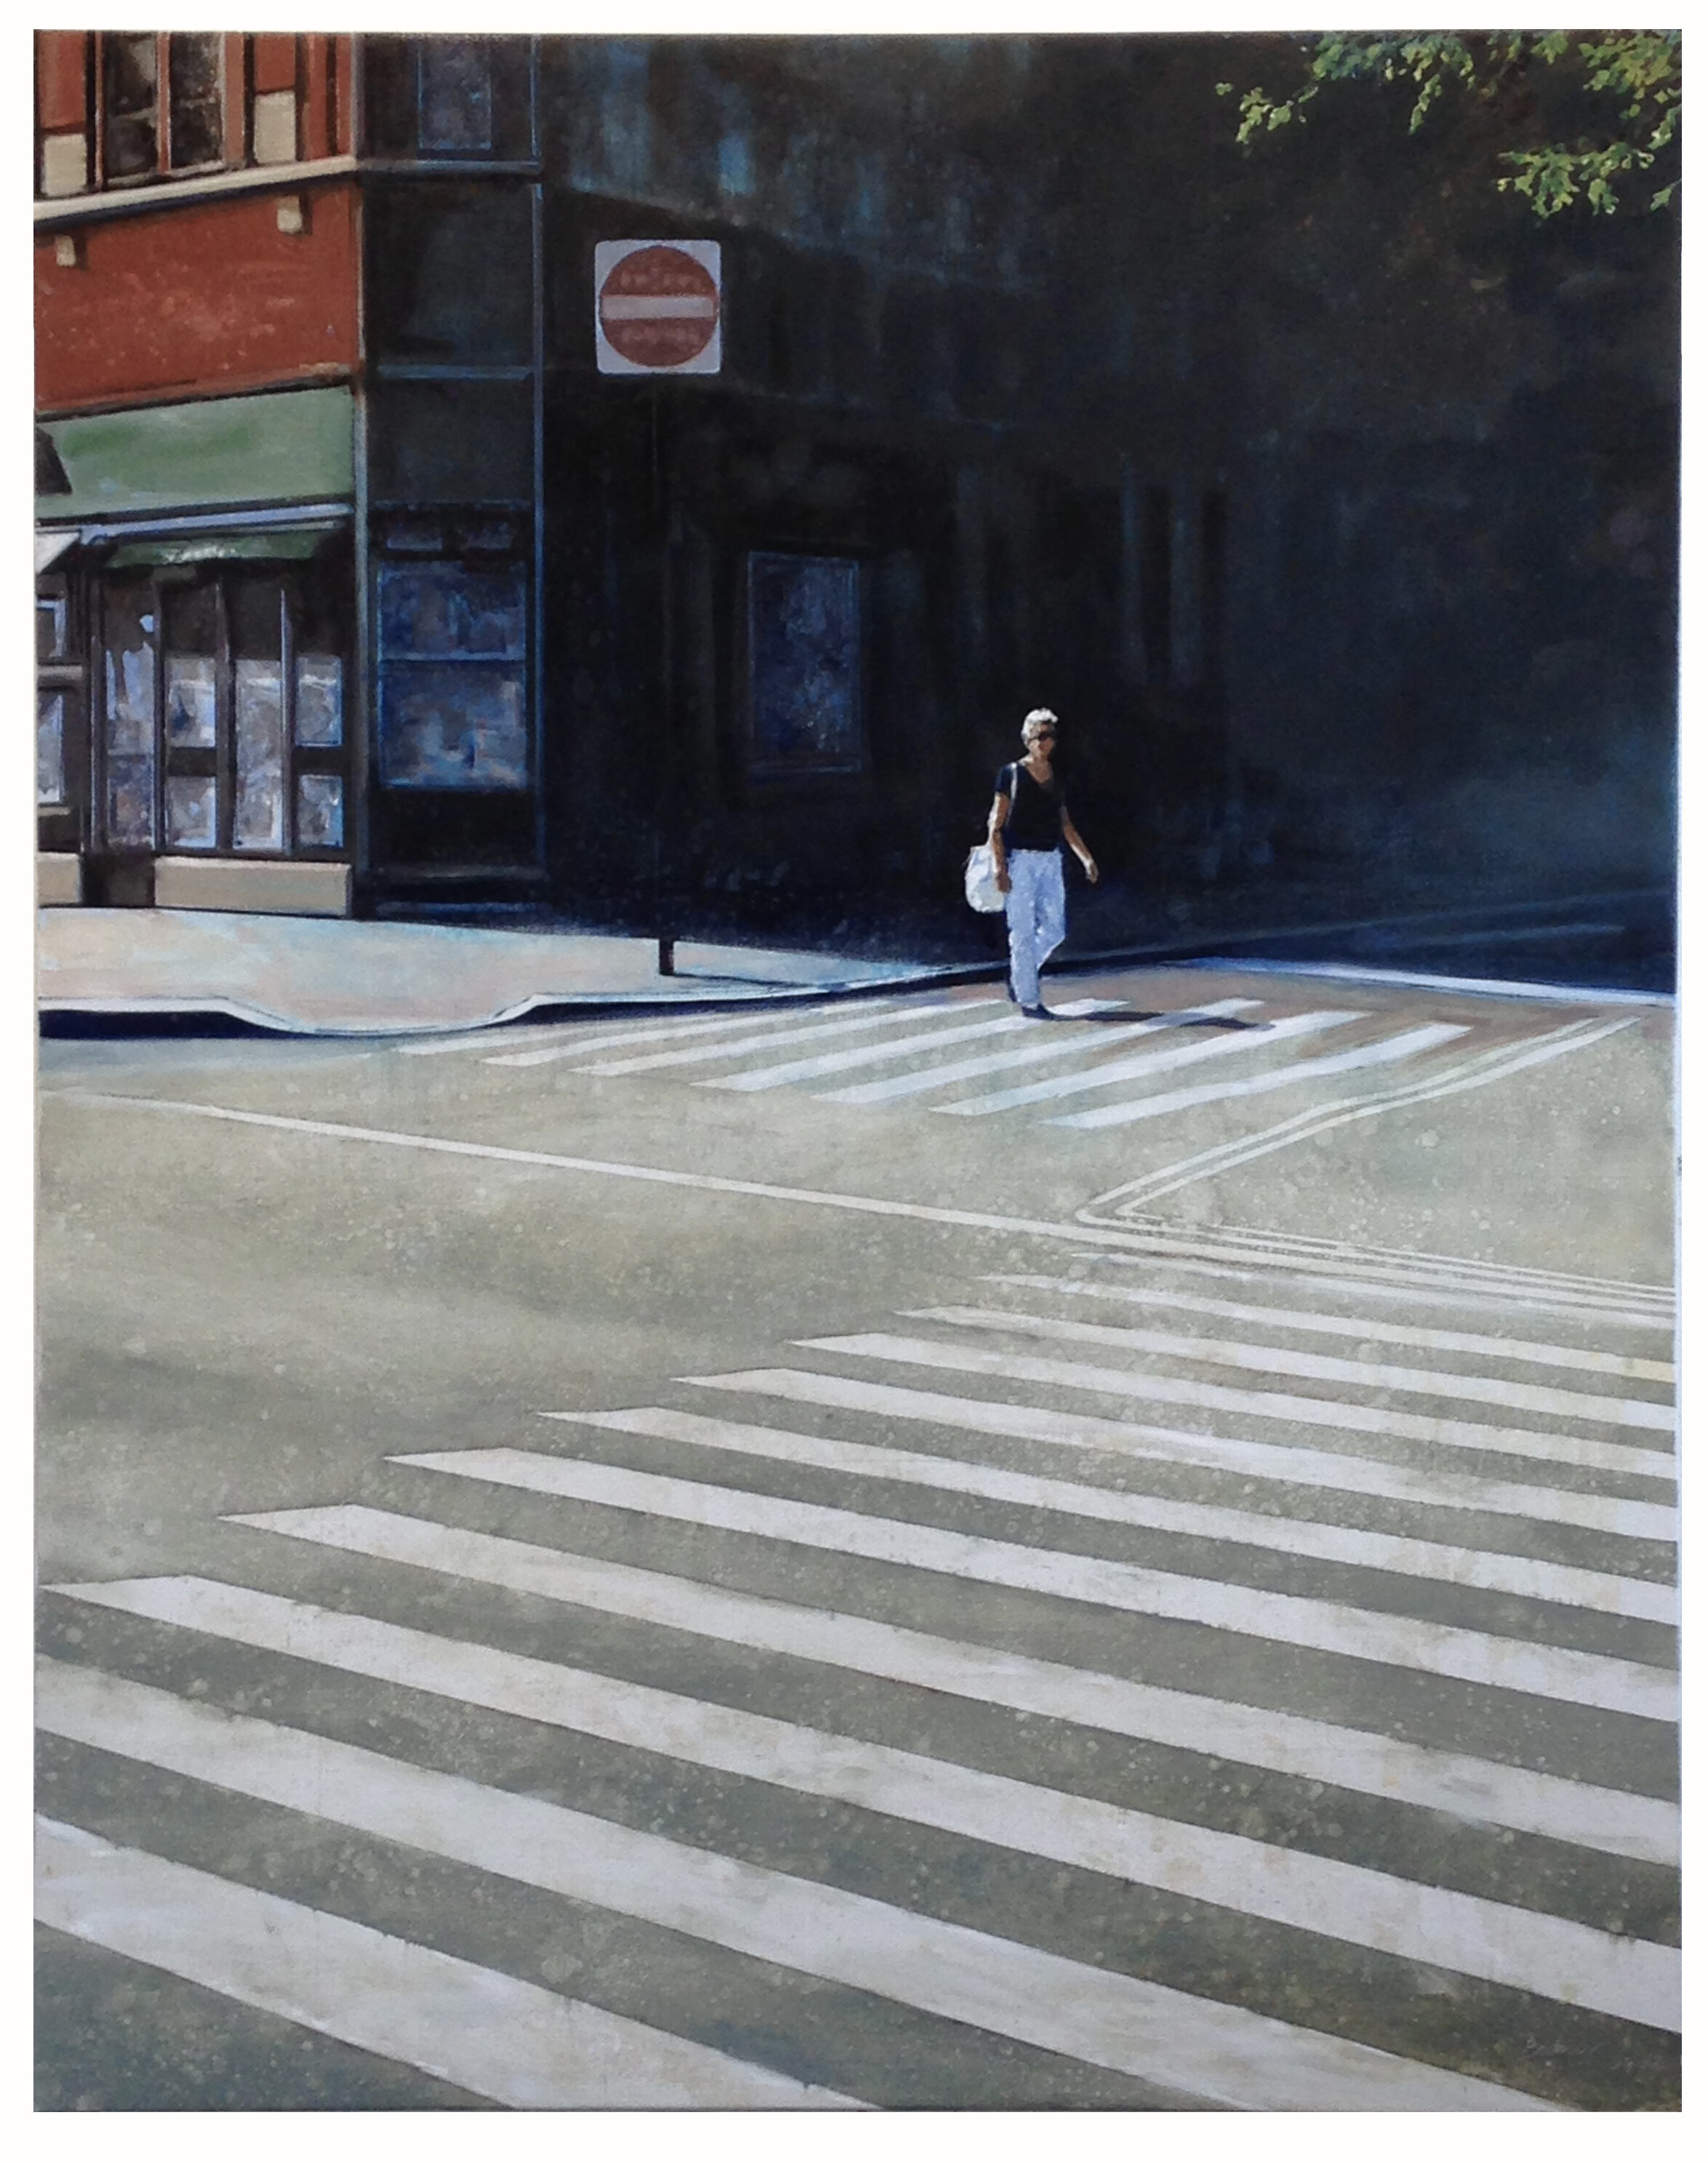  Corner Crossing 57 x 45 inches Oil on linen 2018 